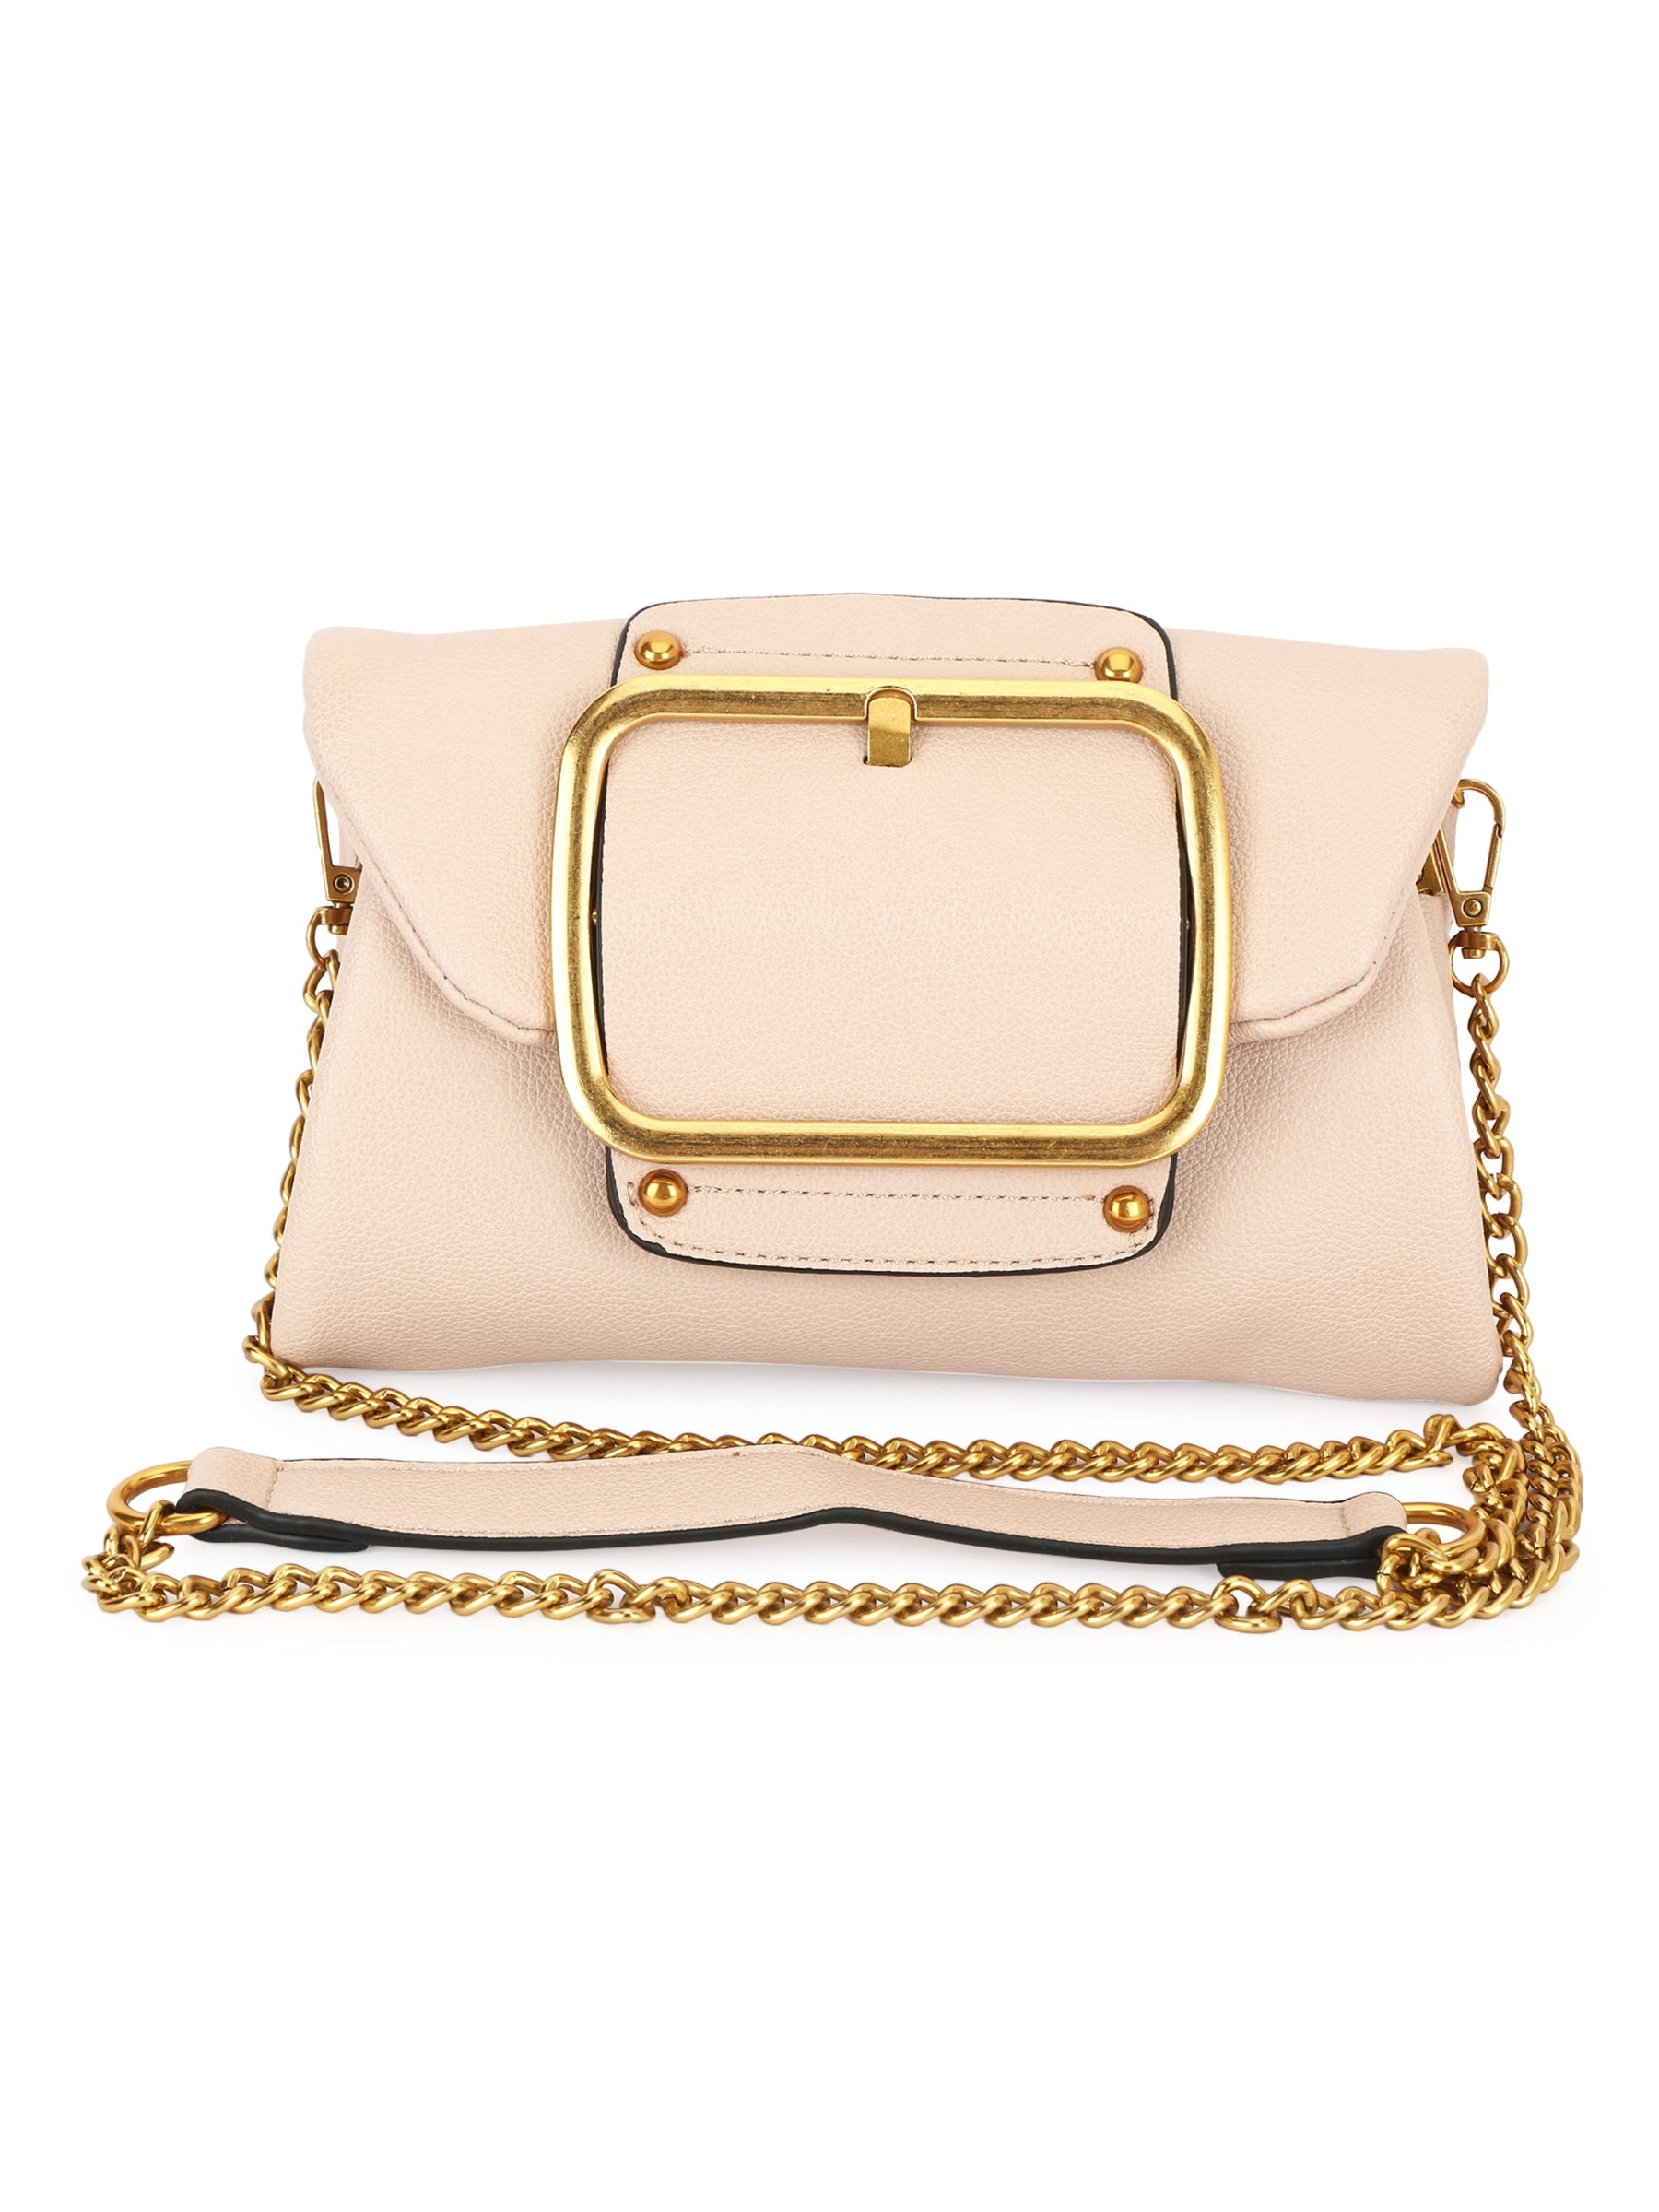 Buckled Gold Chain Bag